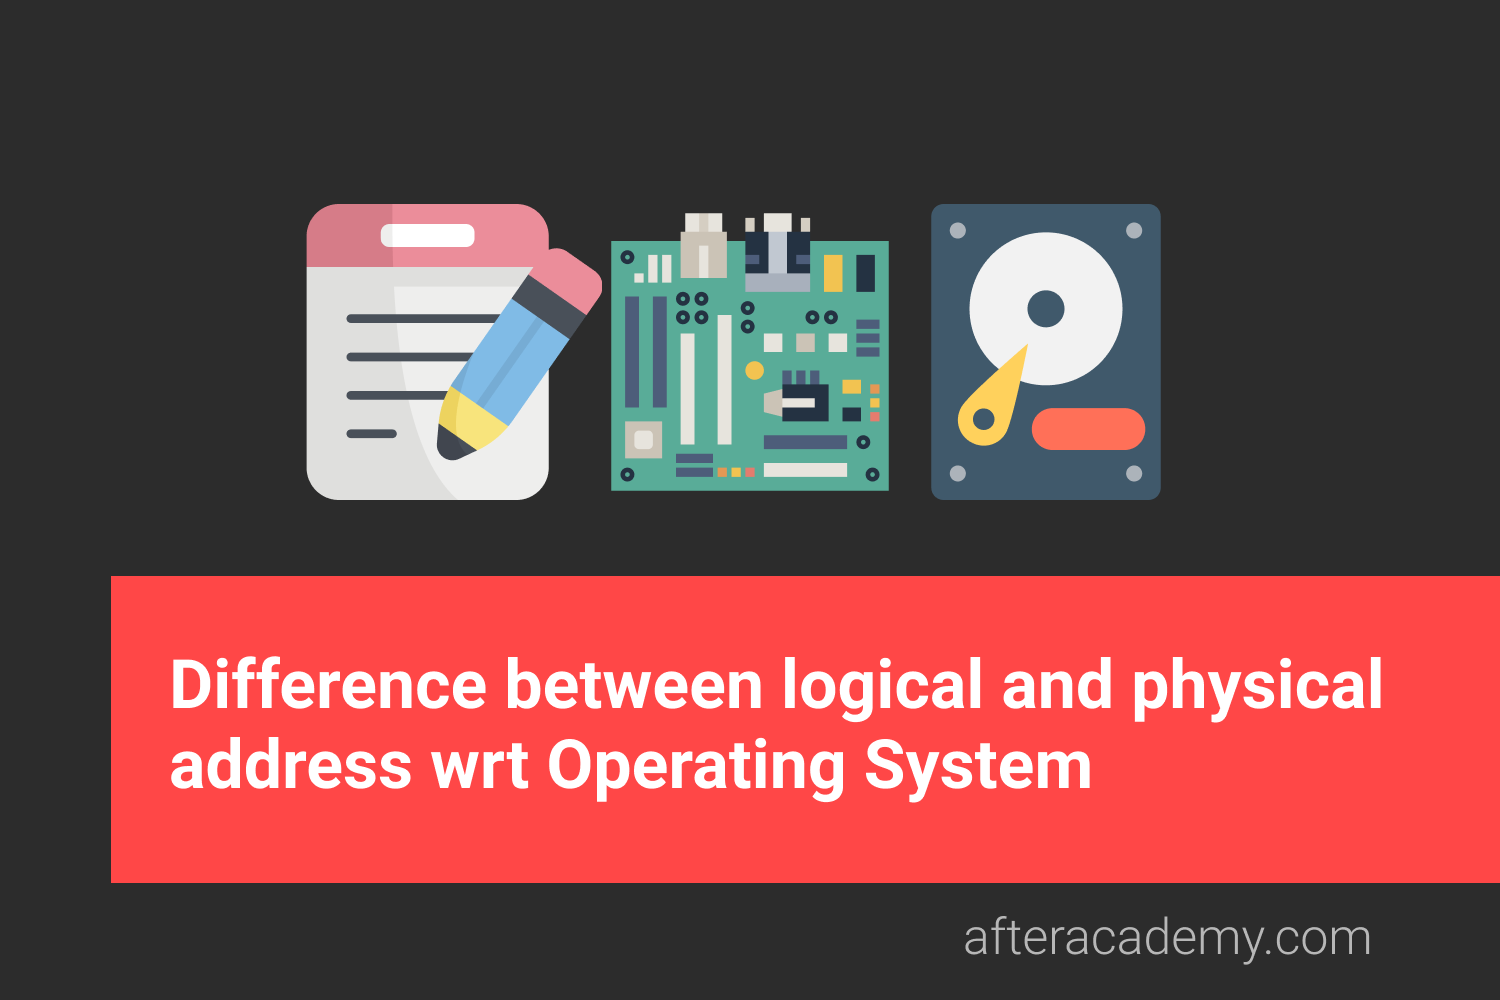 What is the difference between logical and physical address wrt Operating System?